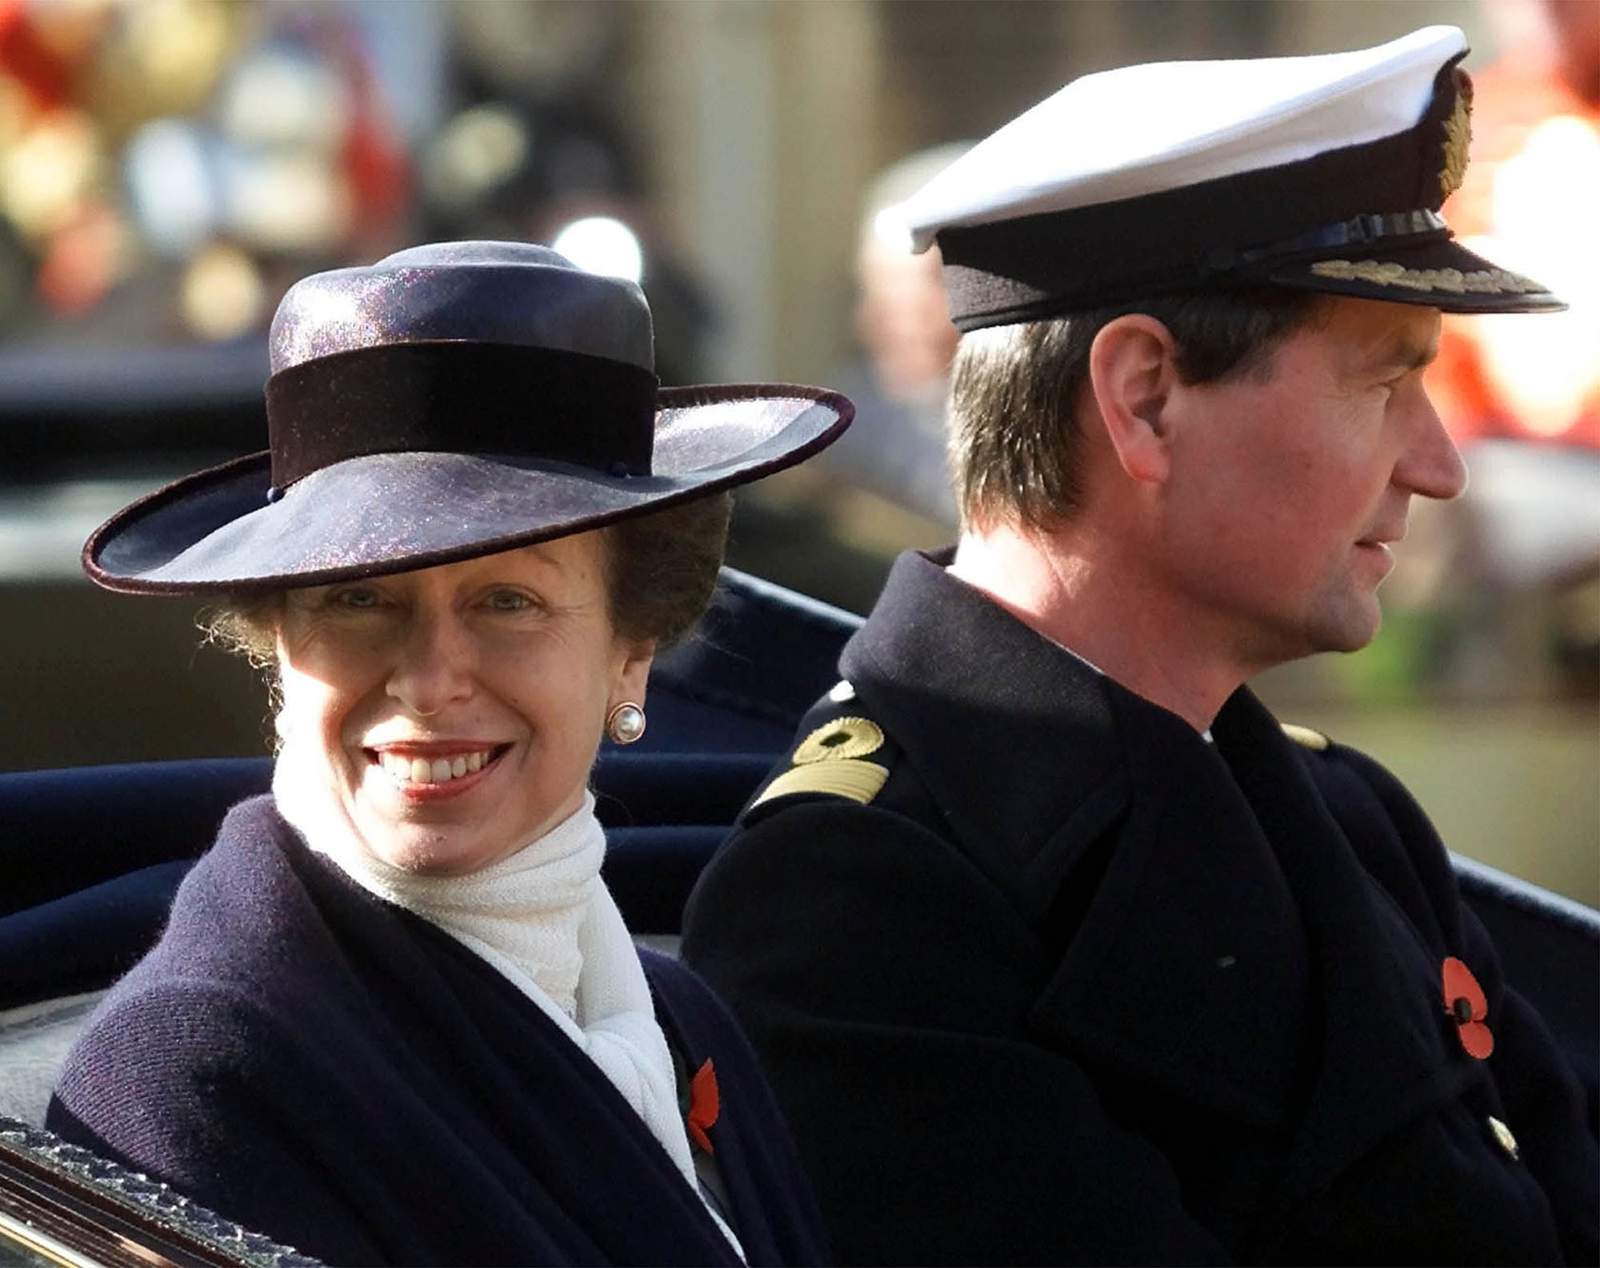 UK's Princess Anne to mark 70th birthday in low-key fashion